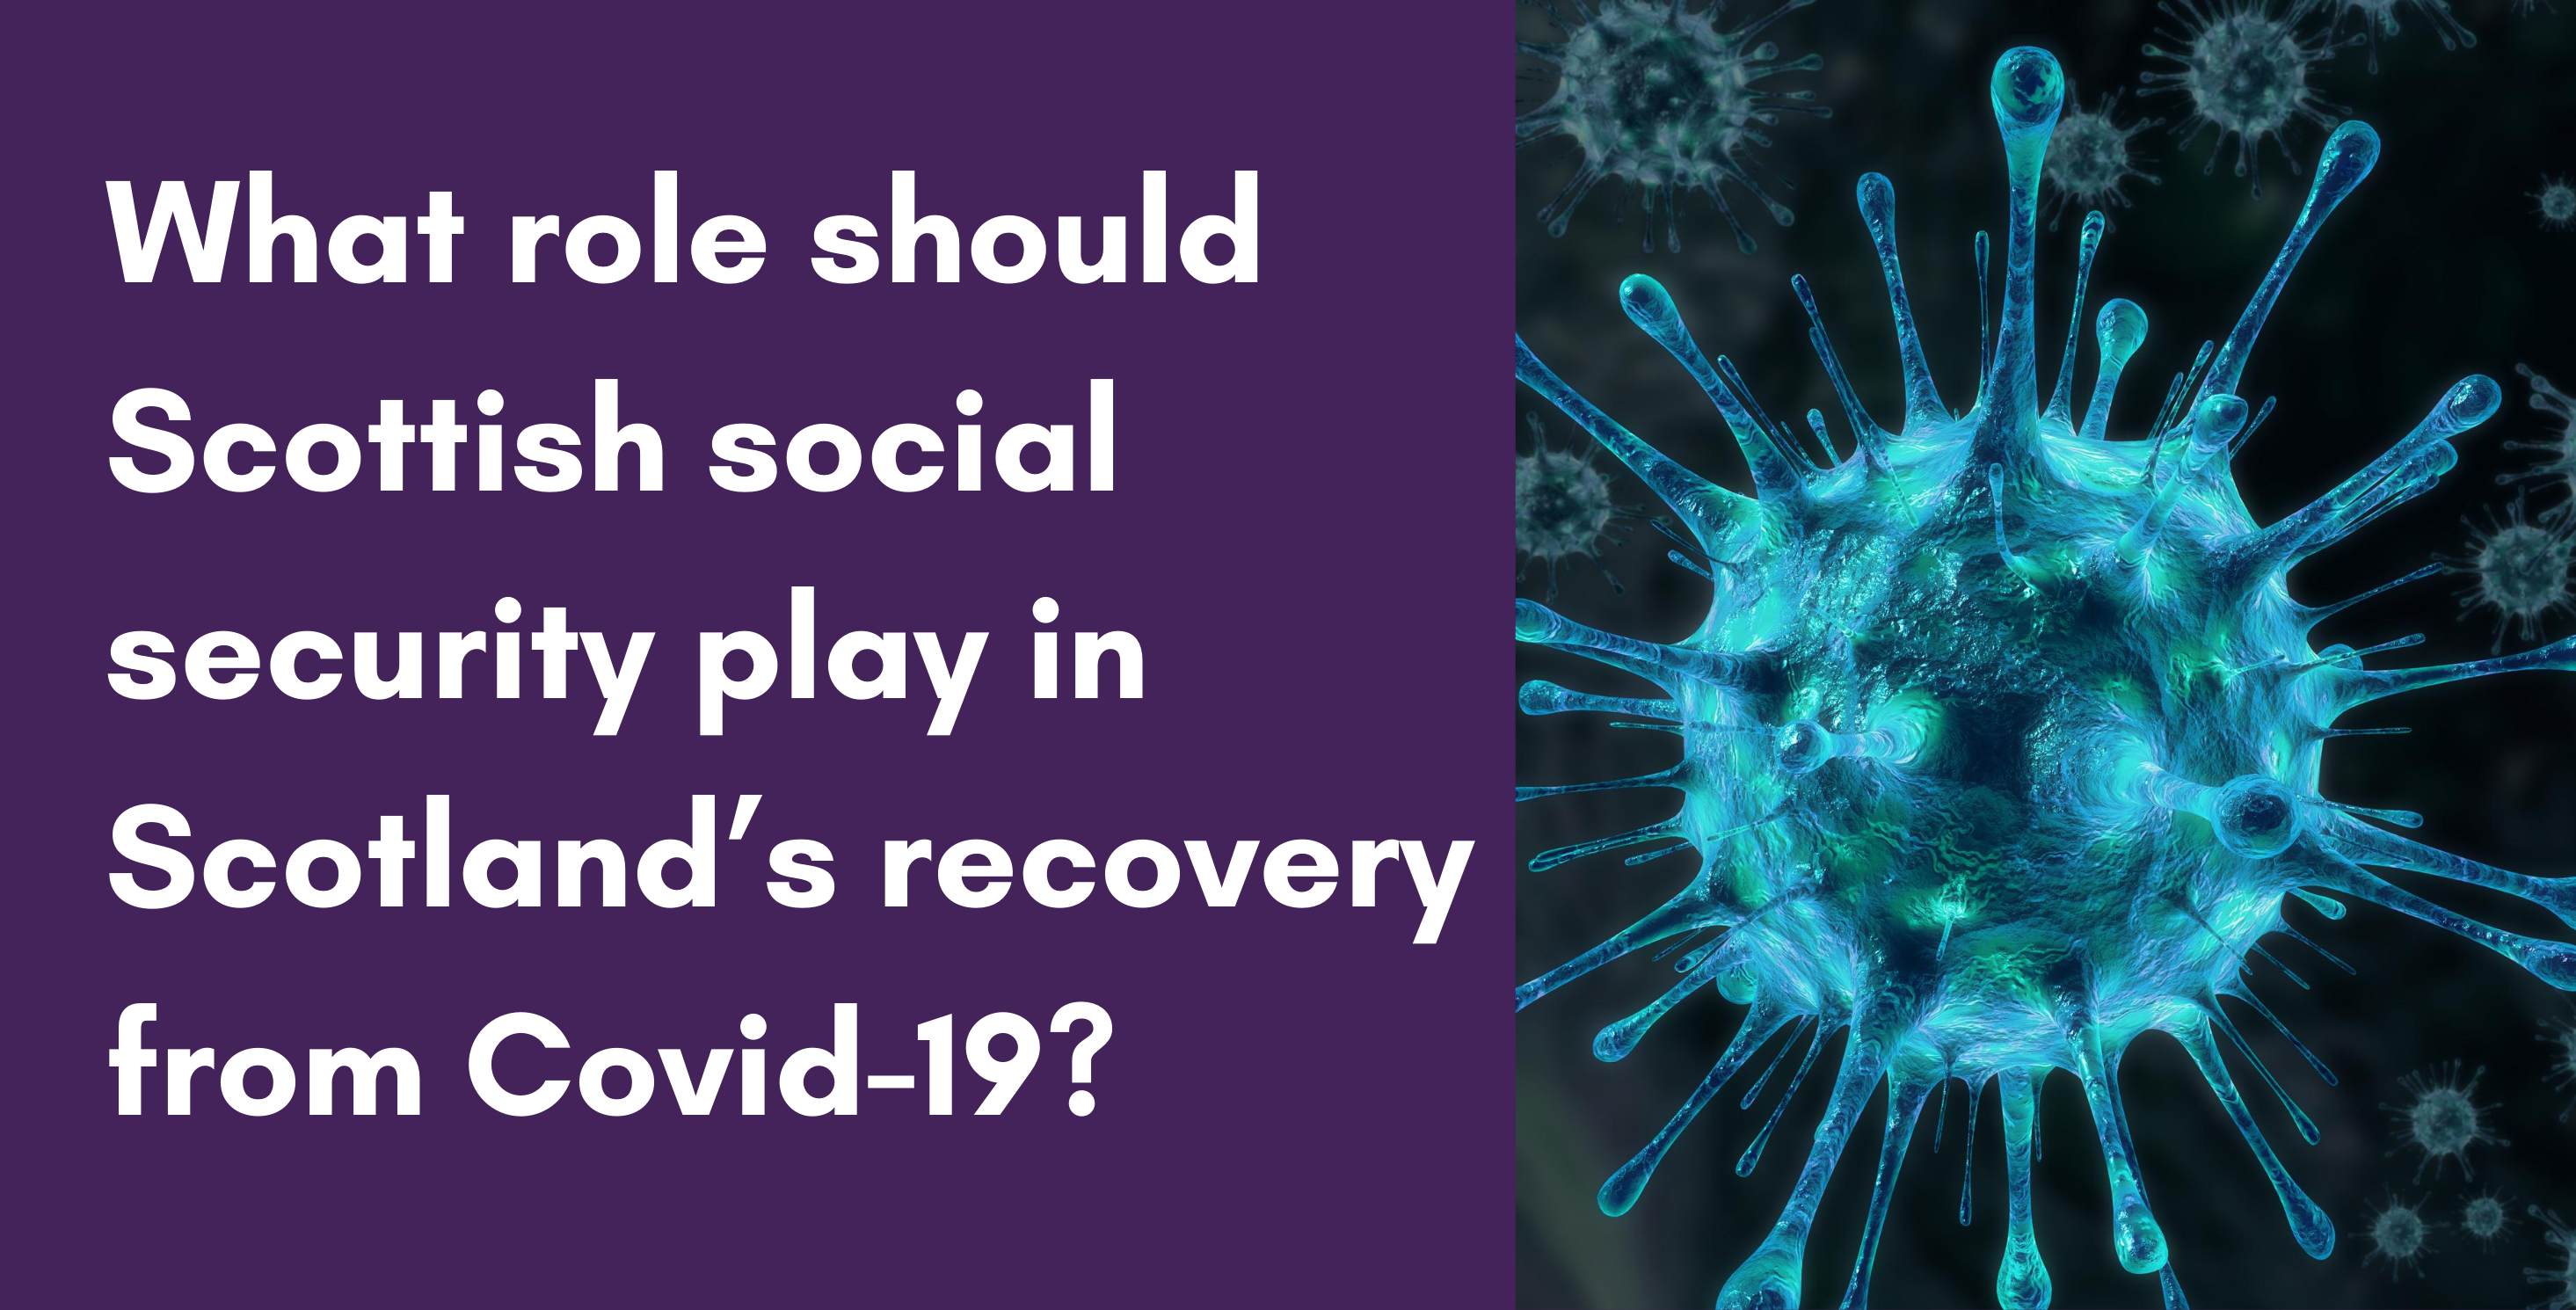 Image asking what role should social security play in Scotland's recovery from Covid-19